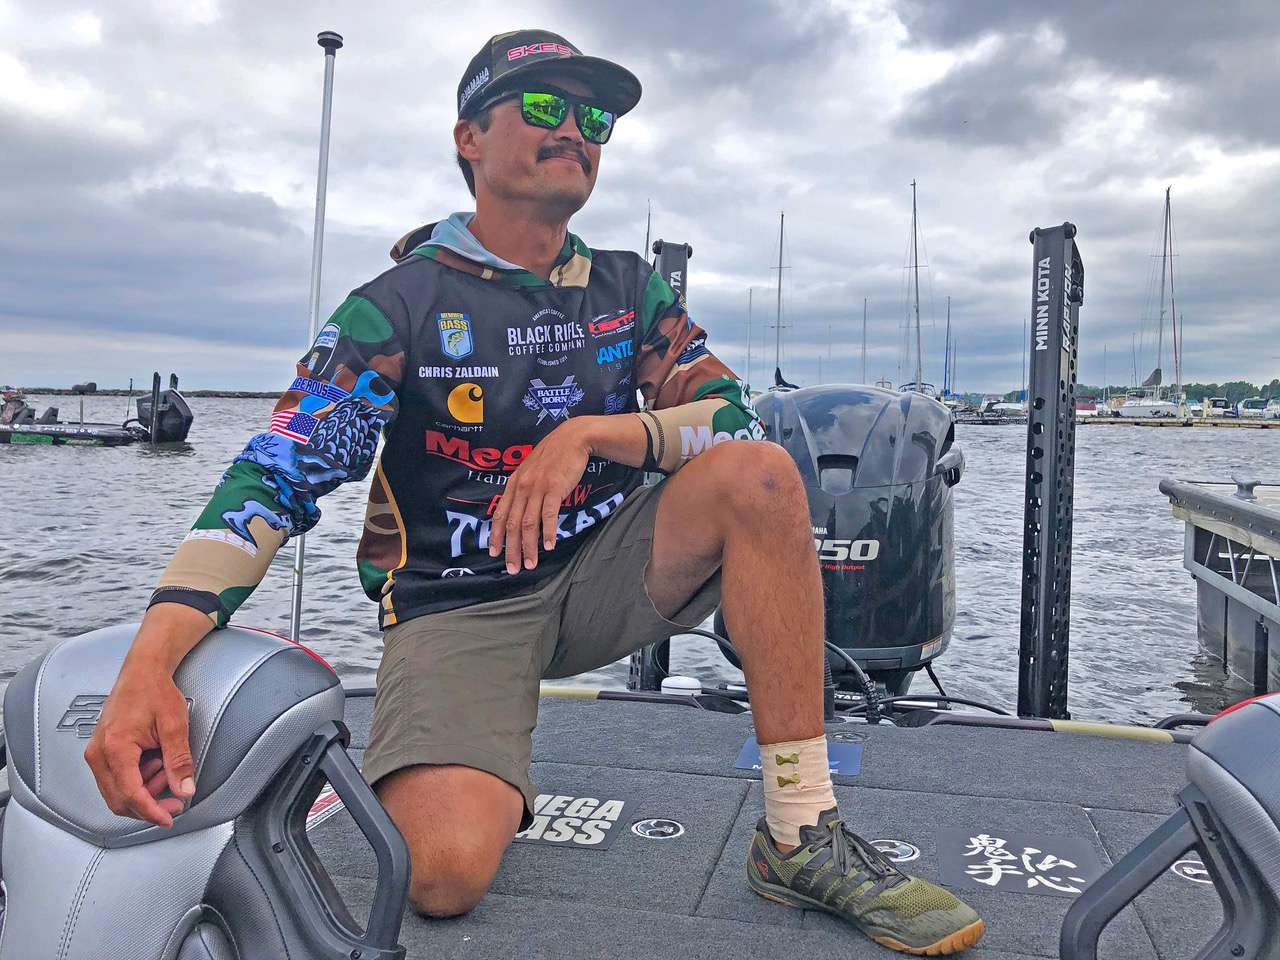 <b>Chris Zaldain</b><br>
Chris Zaldain of Fort Worth, Texas, has fished 150 B.A.S.S. events during his pro career. With six Bassmaster Classic qualifications, Zaldainâs most recent tournament win was the 2015 Toyota Bassmaster Angler of the Year Championship at Sturgeon Bay. Zaldain and his wife, Trait, partnered with Bassmaster and Amazon in 2020 to launch a YouTube series entitled Zaldaingerous, which gave an in-depth look at life on the road during tournament season. 
